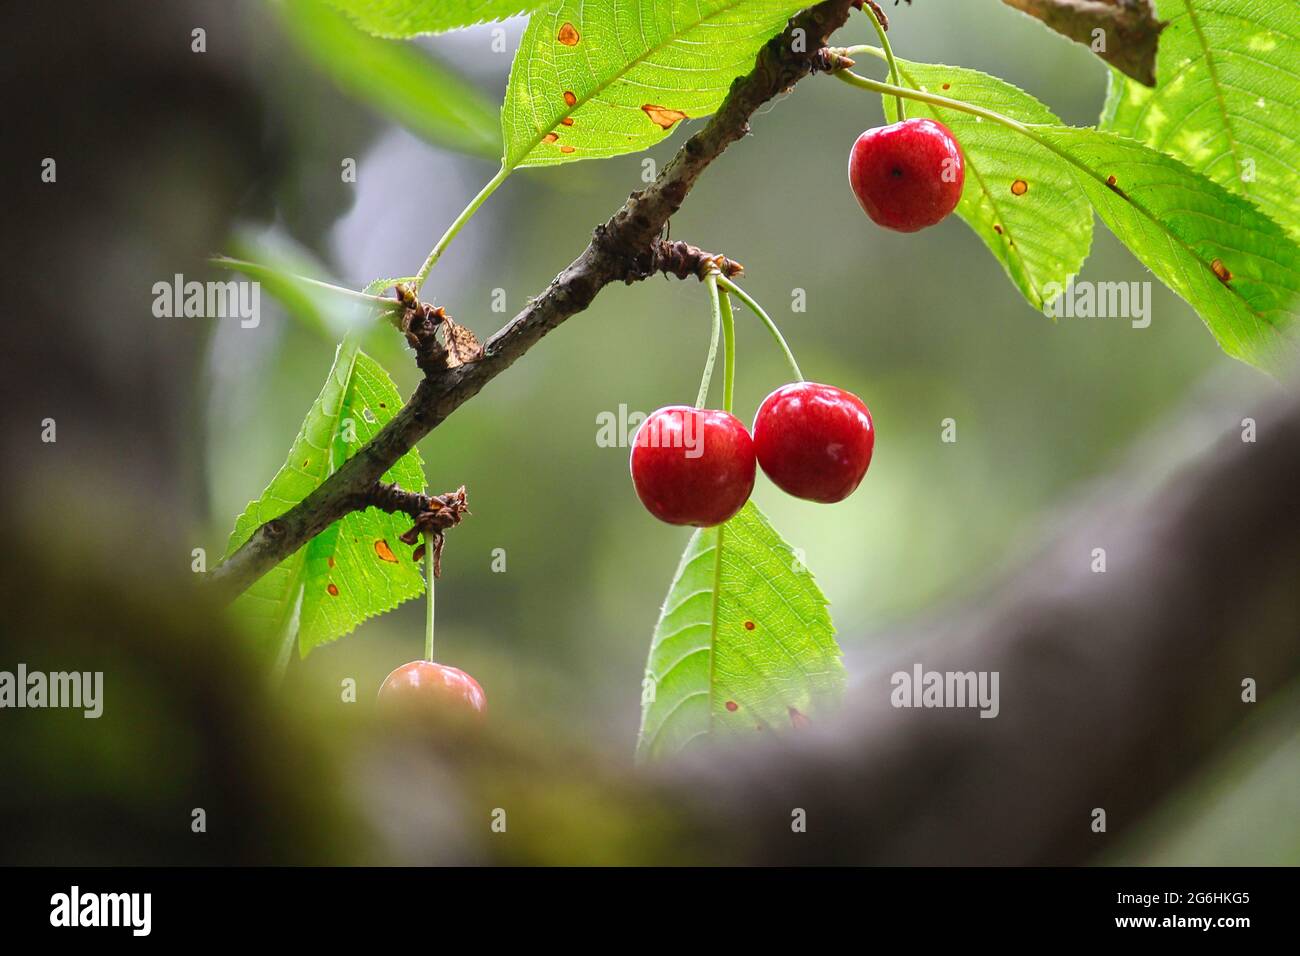 Rainier cherries growing on a tree in our backyard Stock Photo